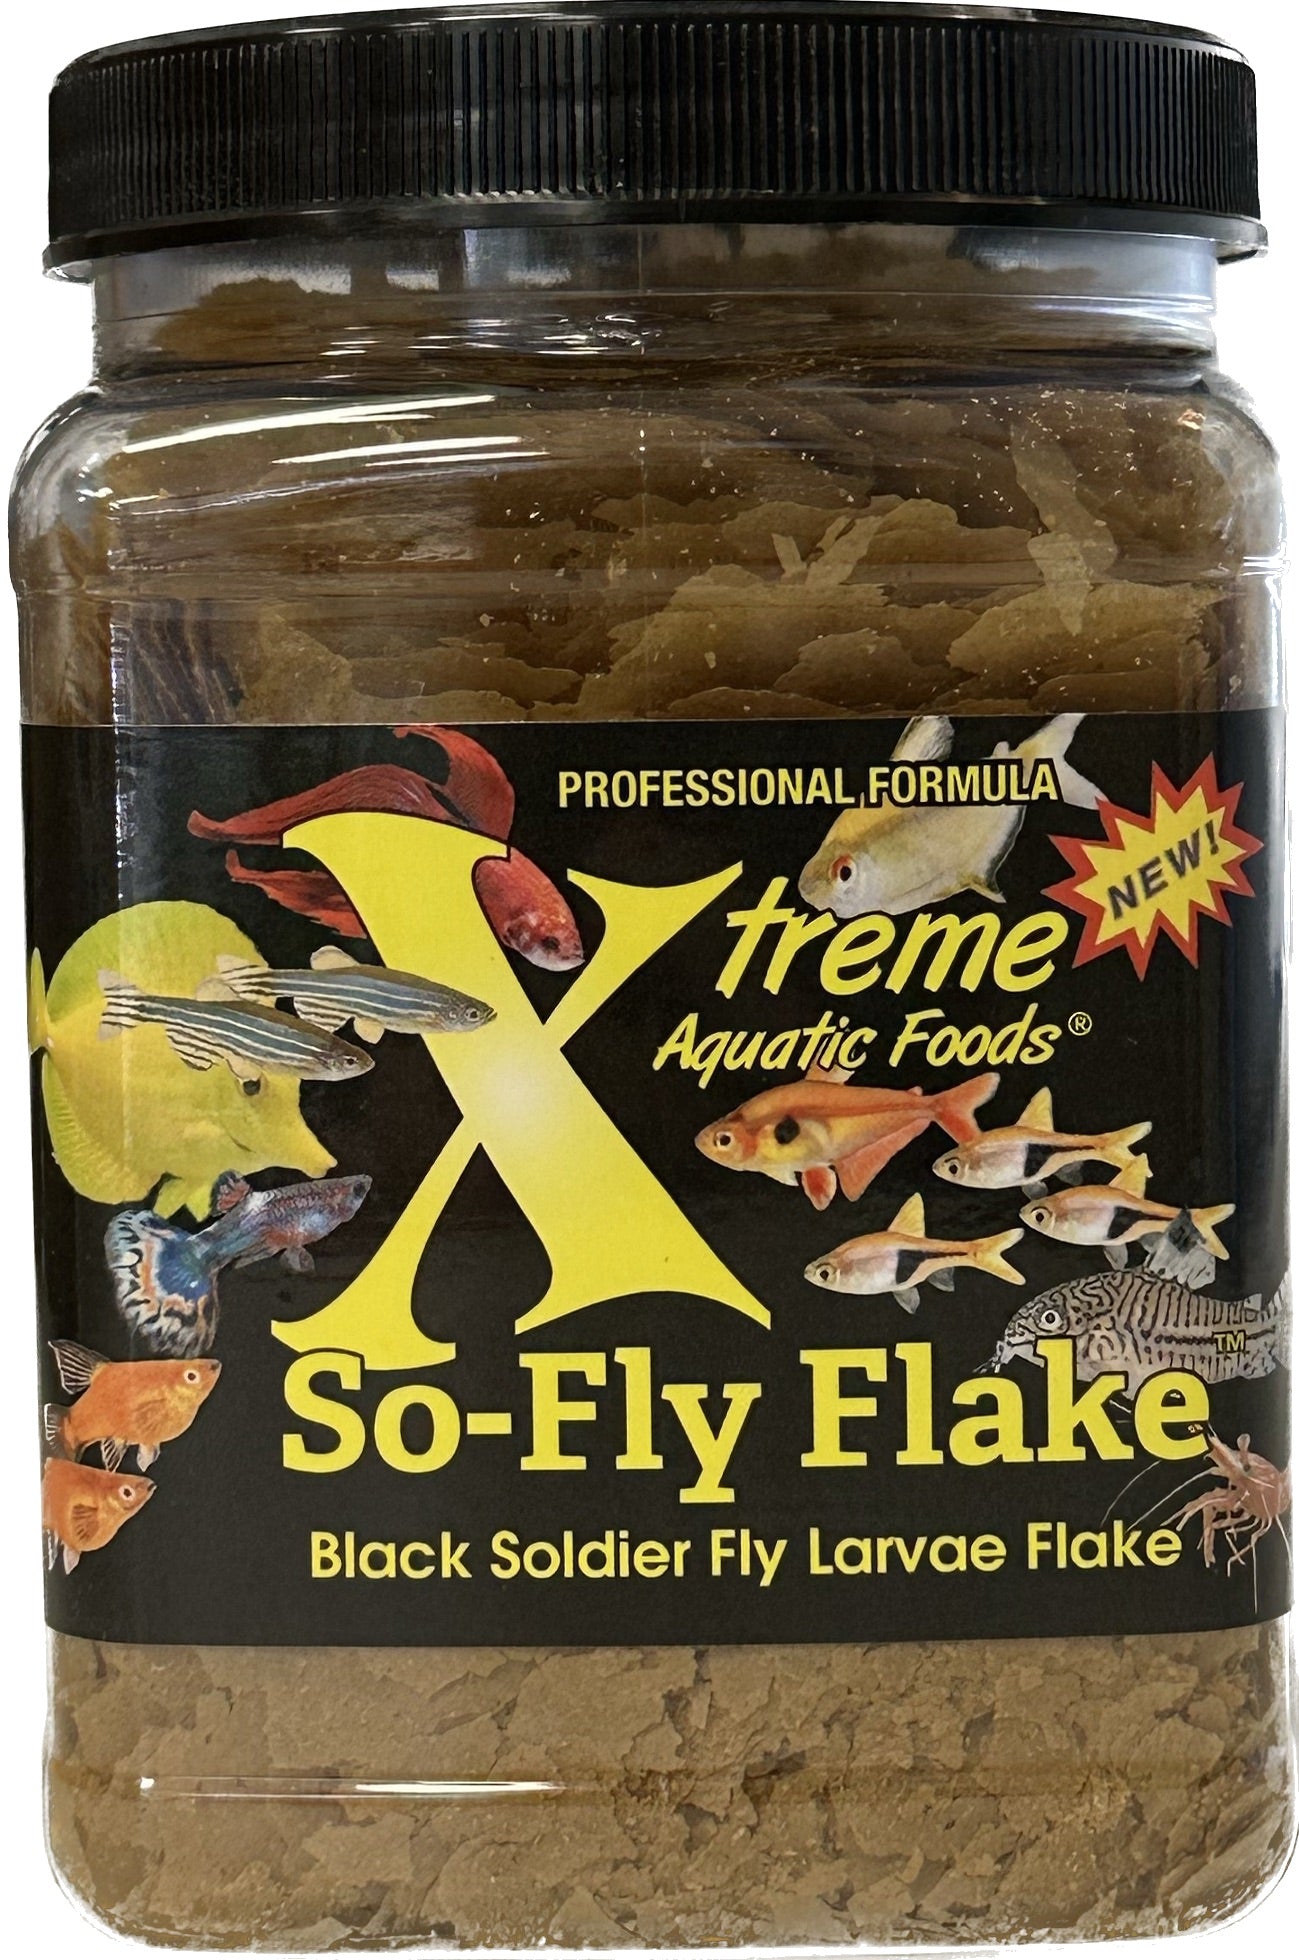 Xtreme Aquatic Foods So-Fly Flakes